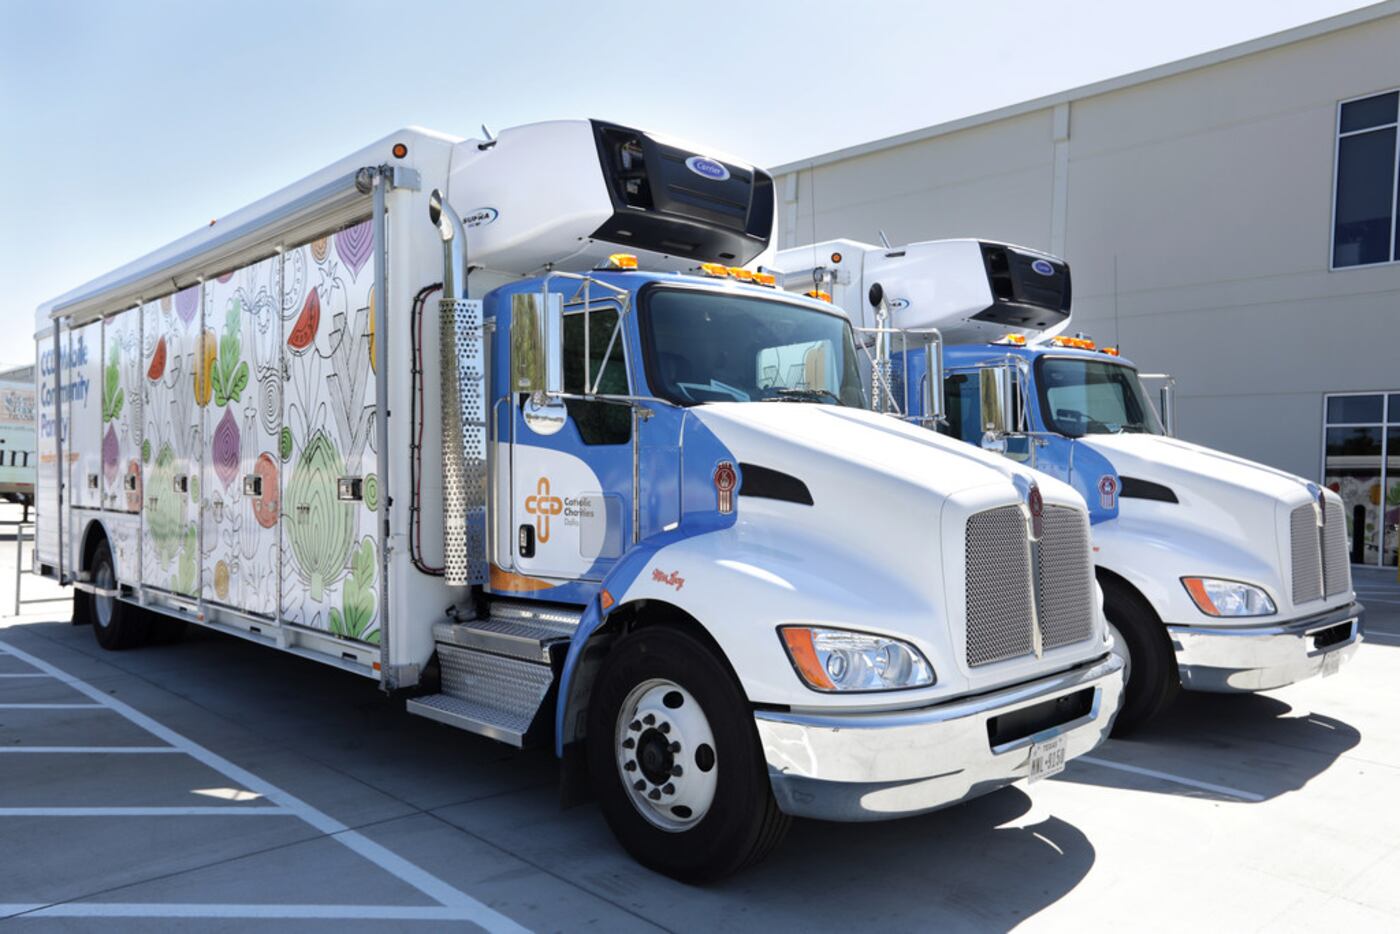 Catholic Charities Dallas' partnership with North Texas Food Bank has resulted in two new...